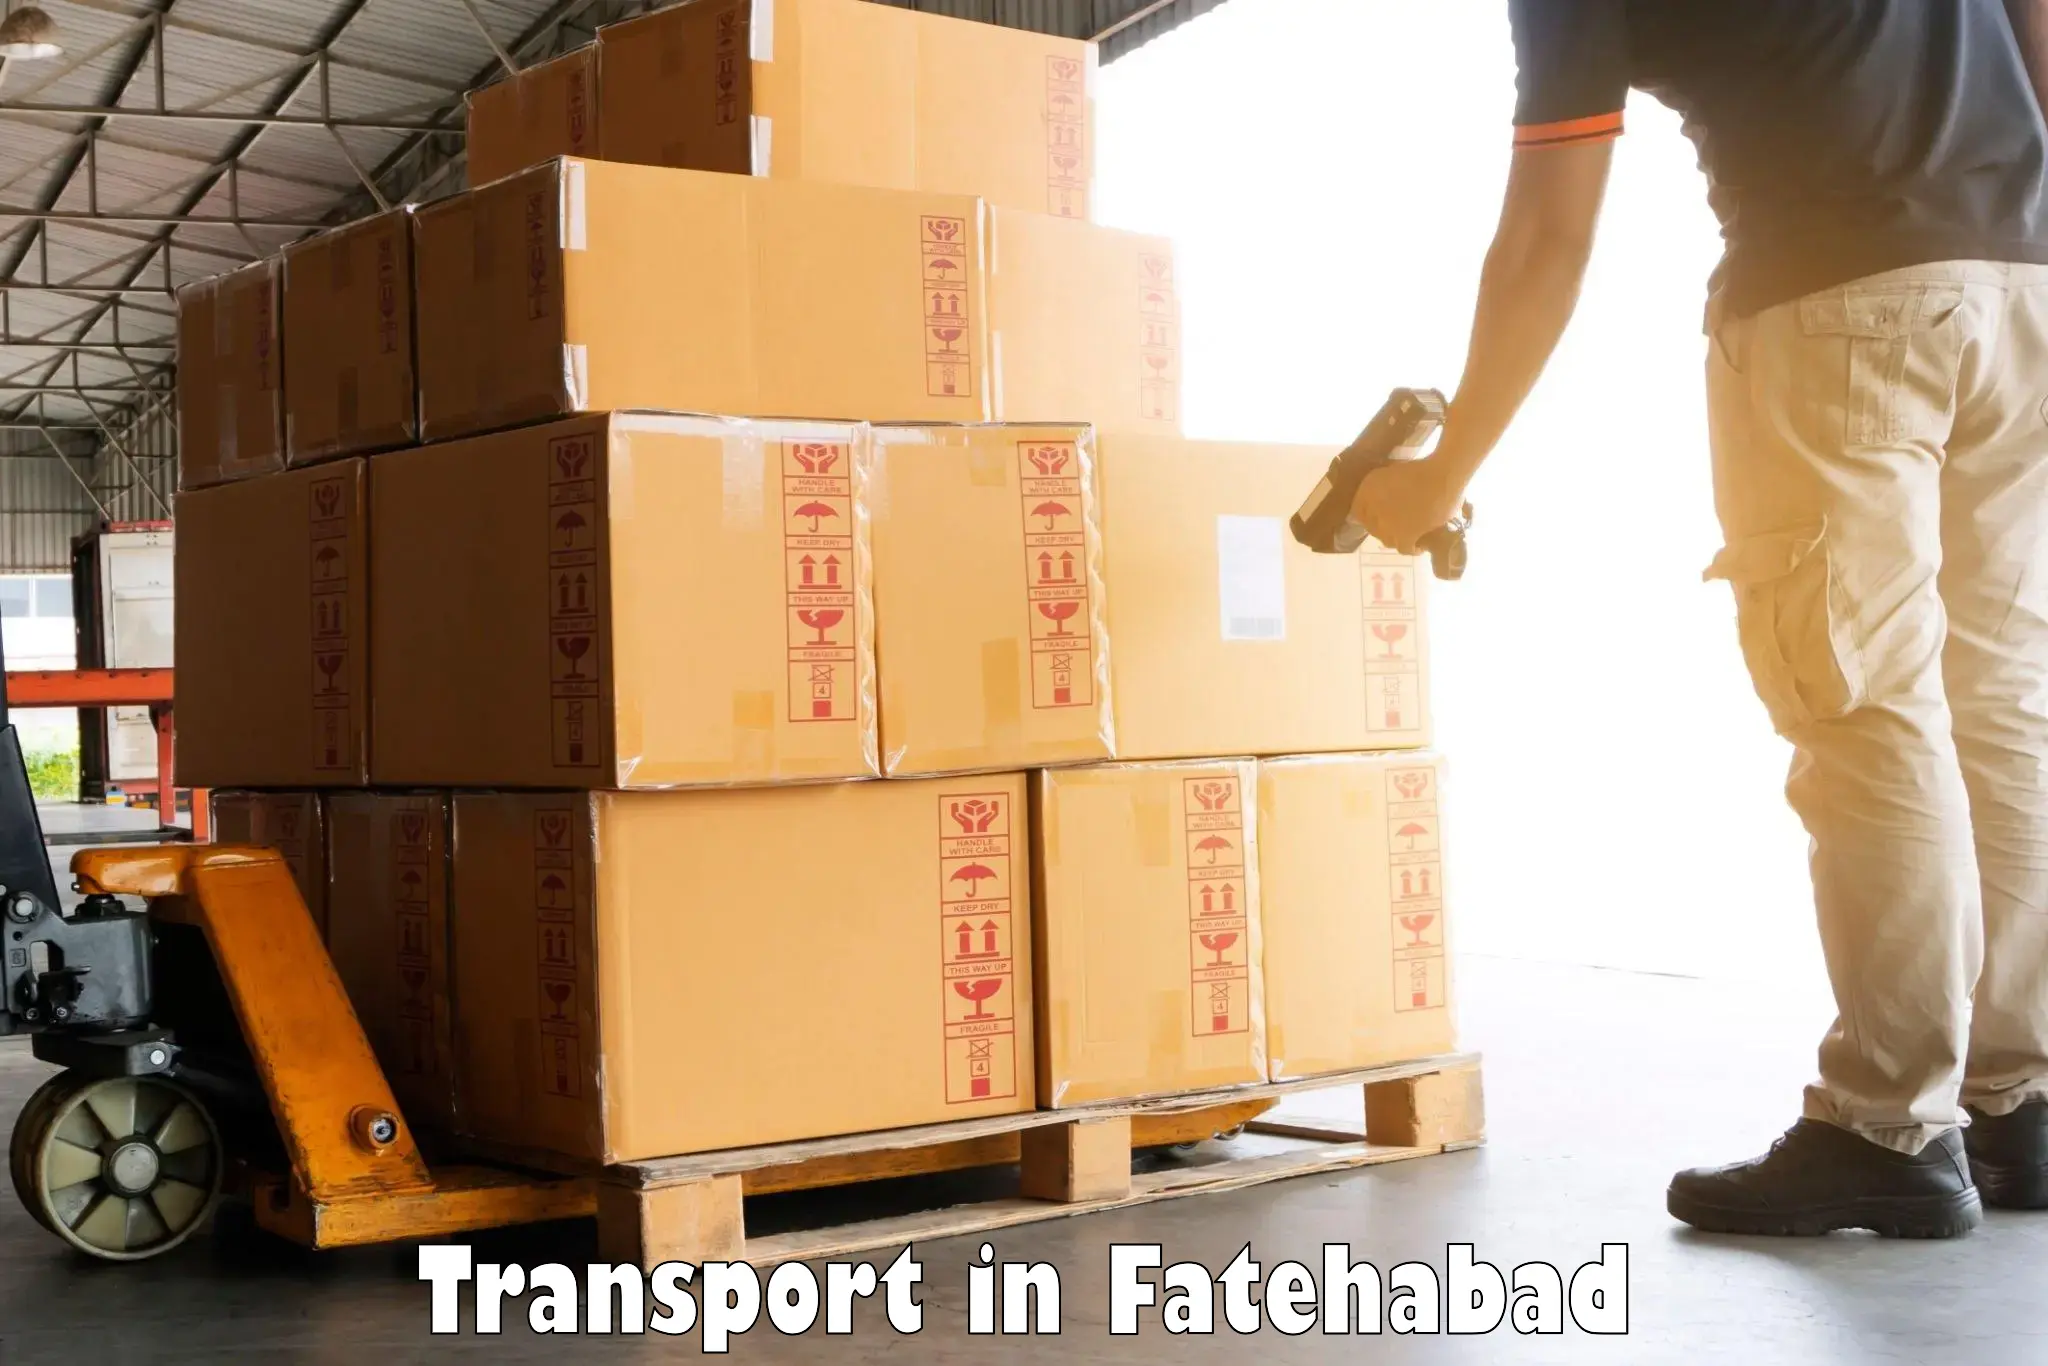 Transport bike from one state to another in Fatehabad